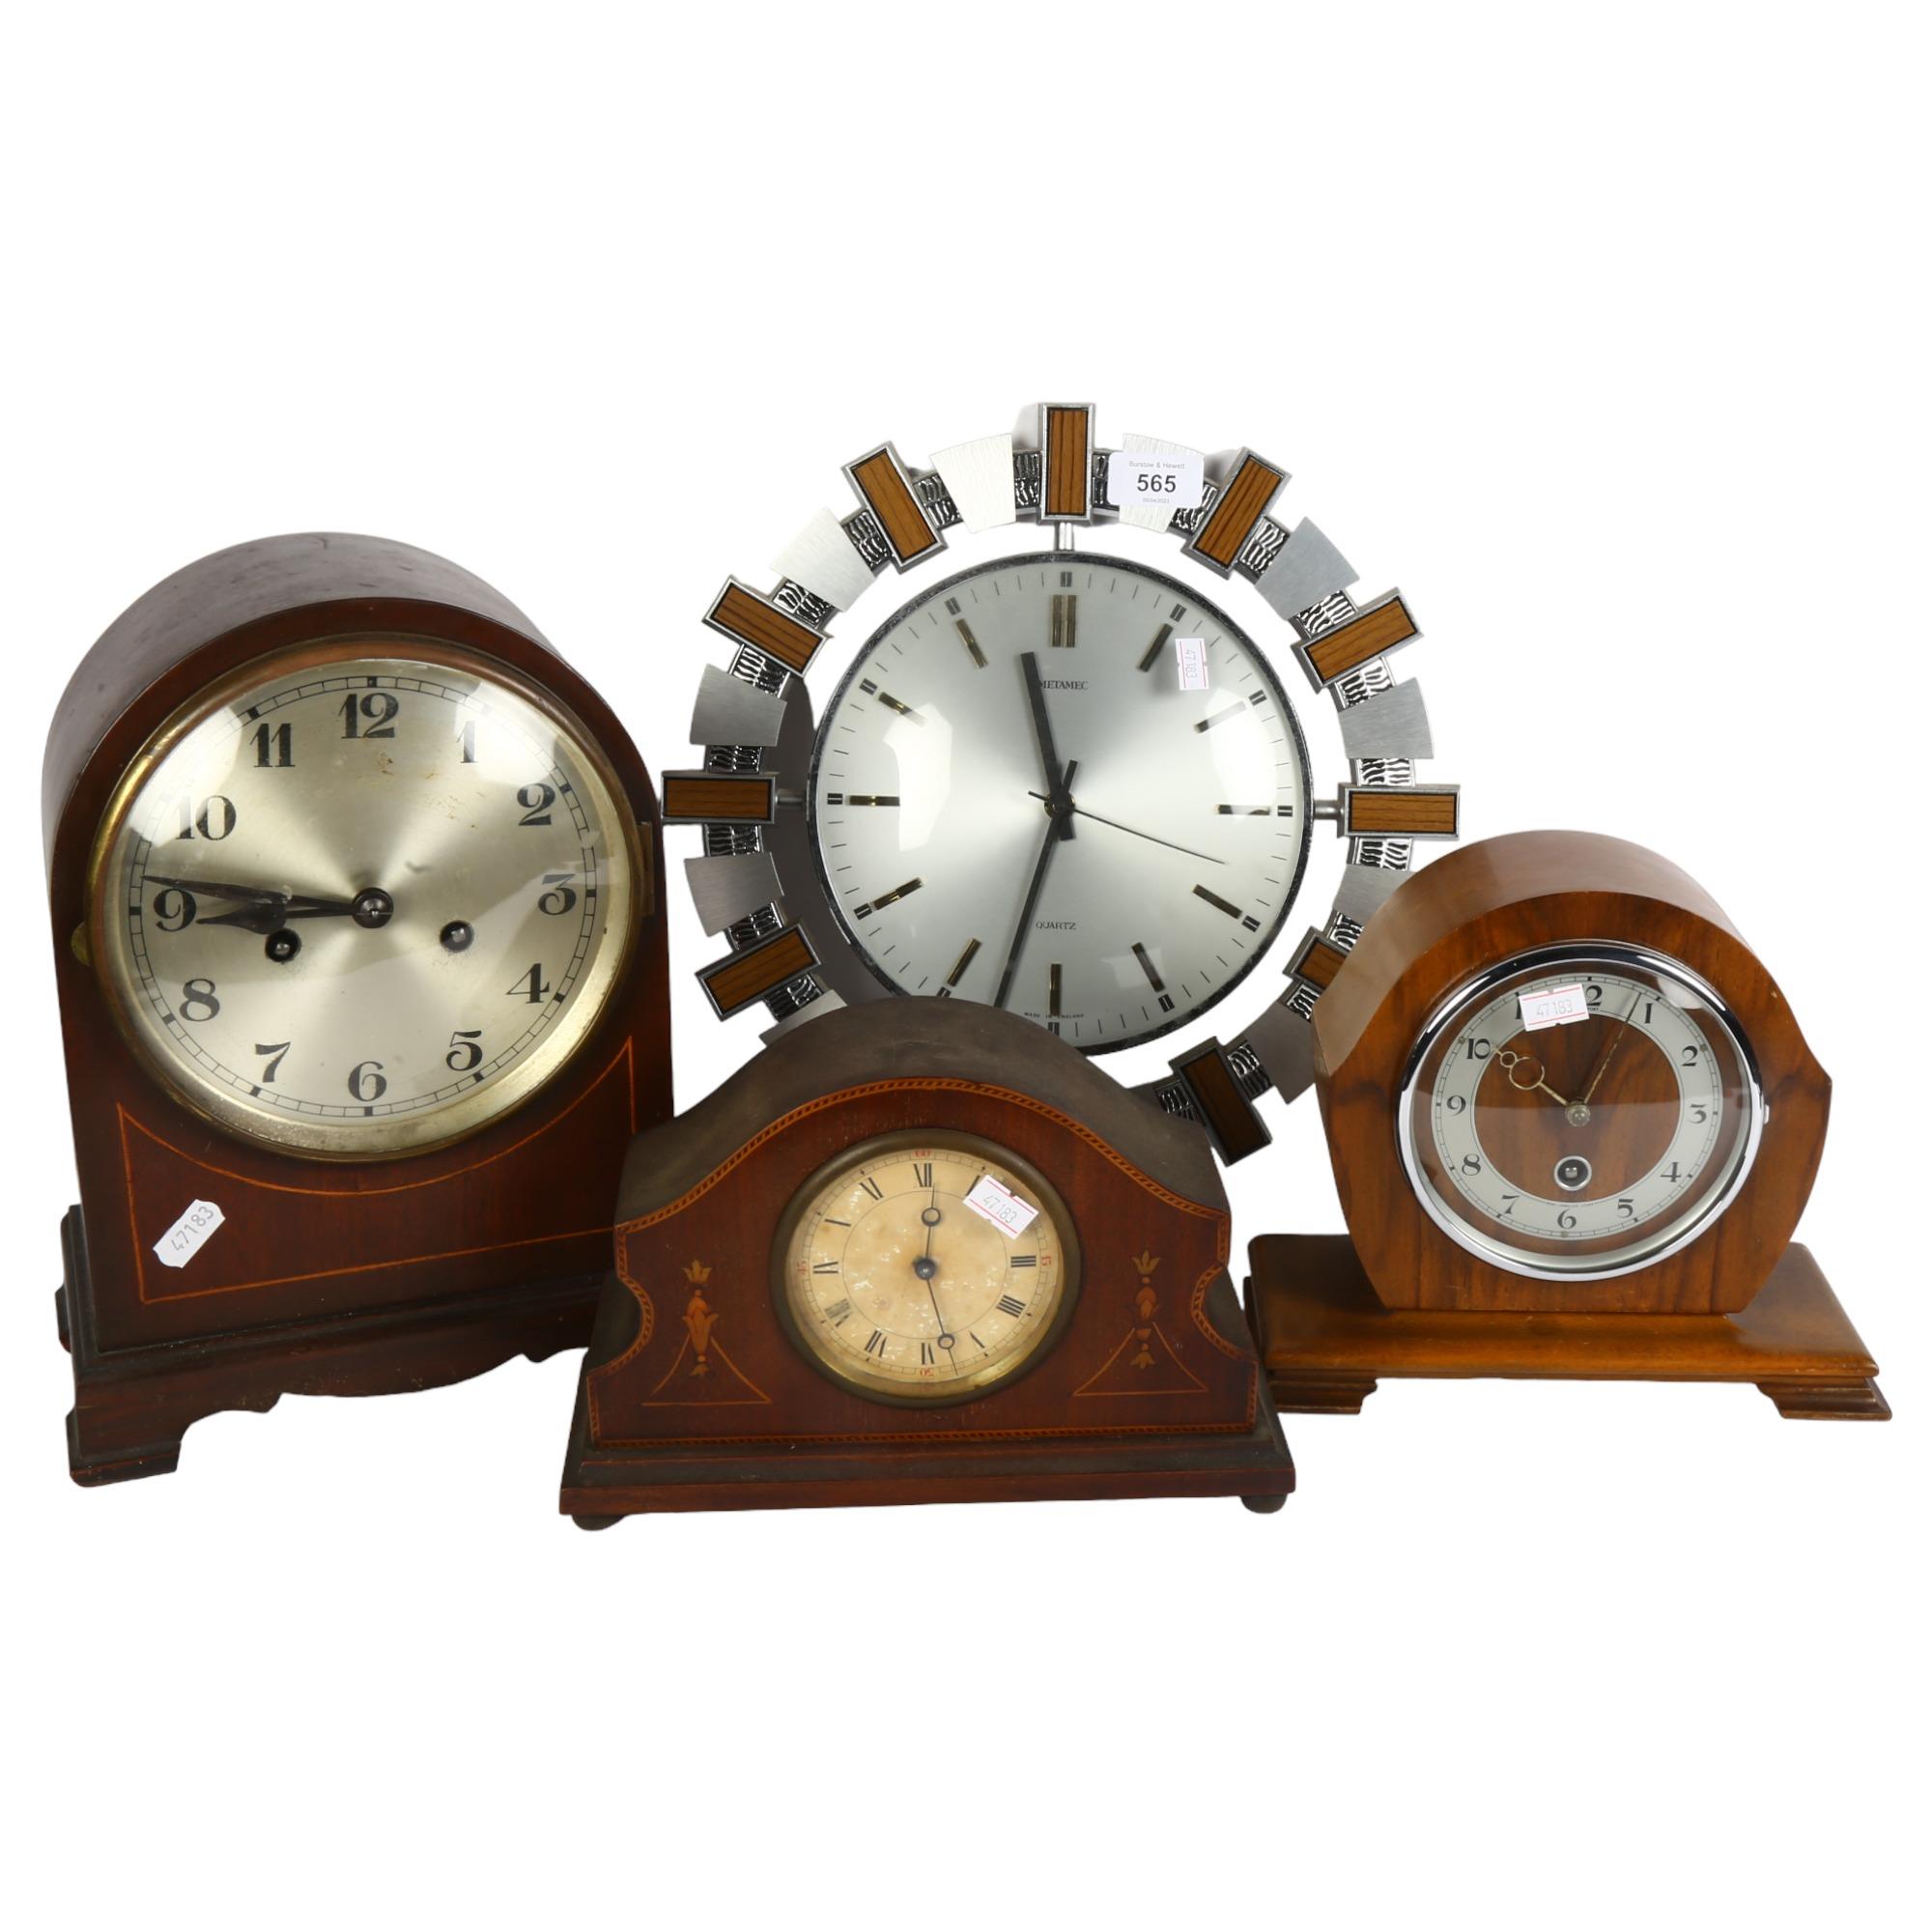 A group of 4 clocks, including a dome-top mantel clock with 2-train movement, 29cm, 2 other mantel